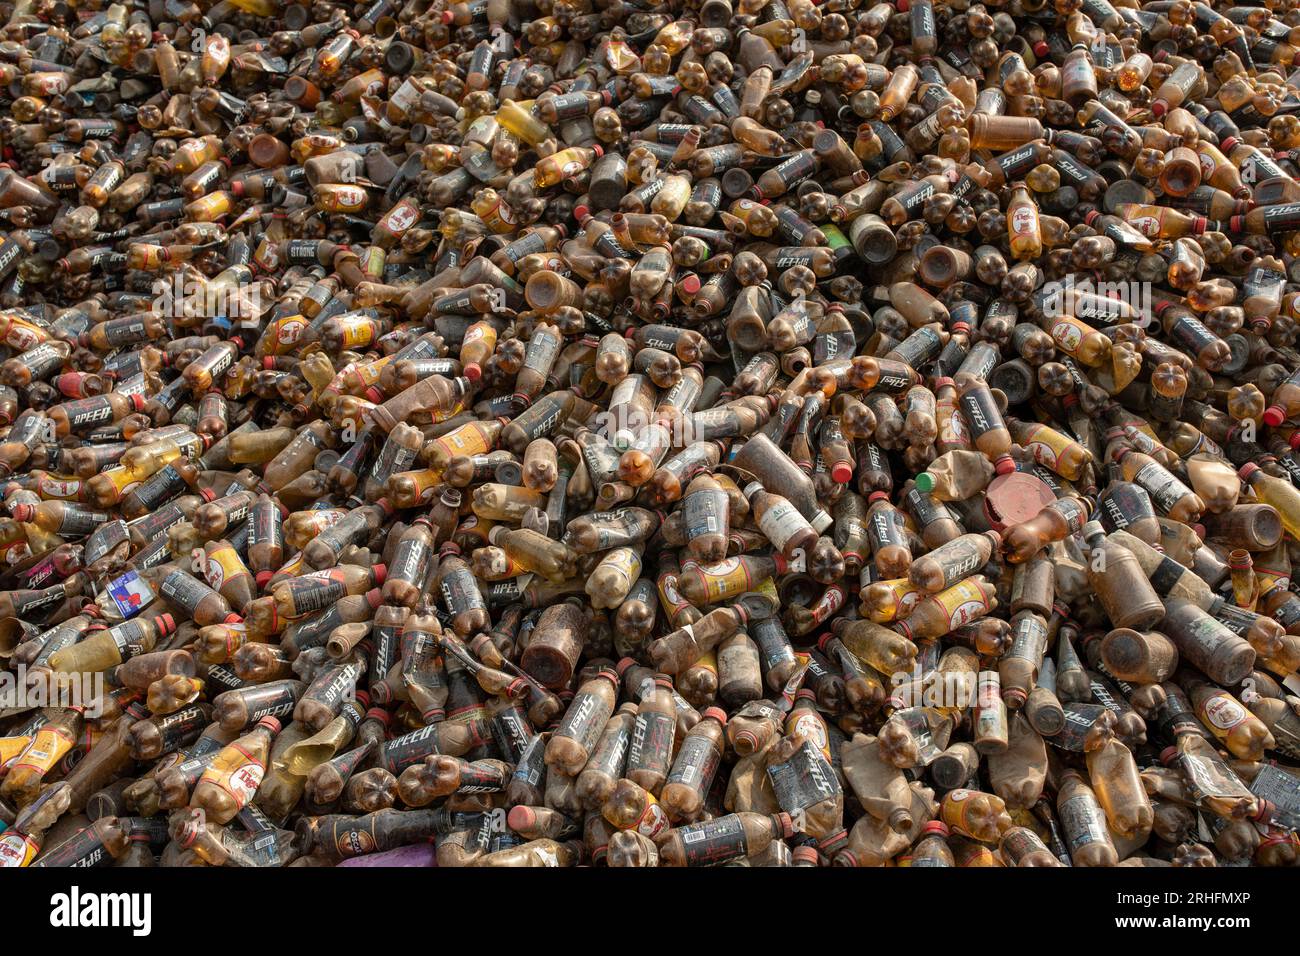 Different types of plastic bottles gathered for recycling in Dhaka, Bangladesh. Stock Photo